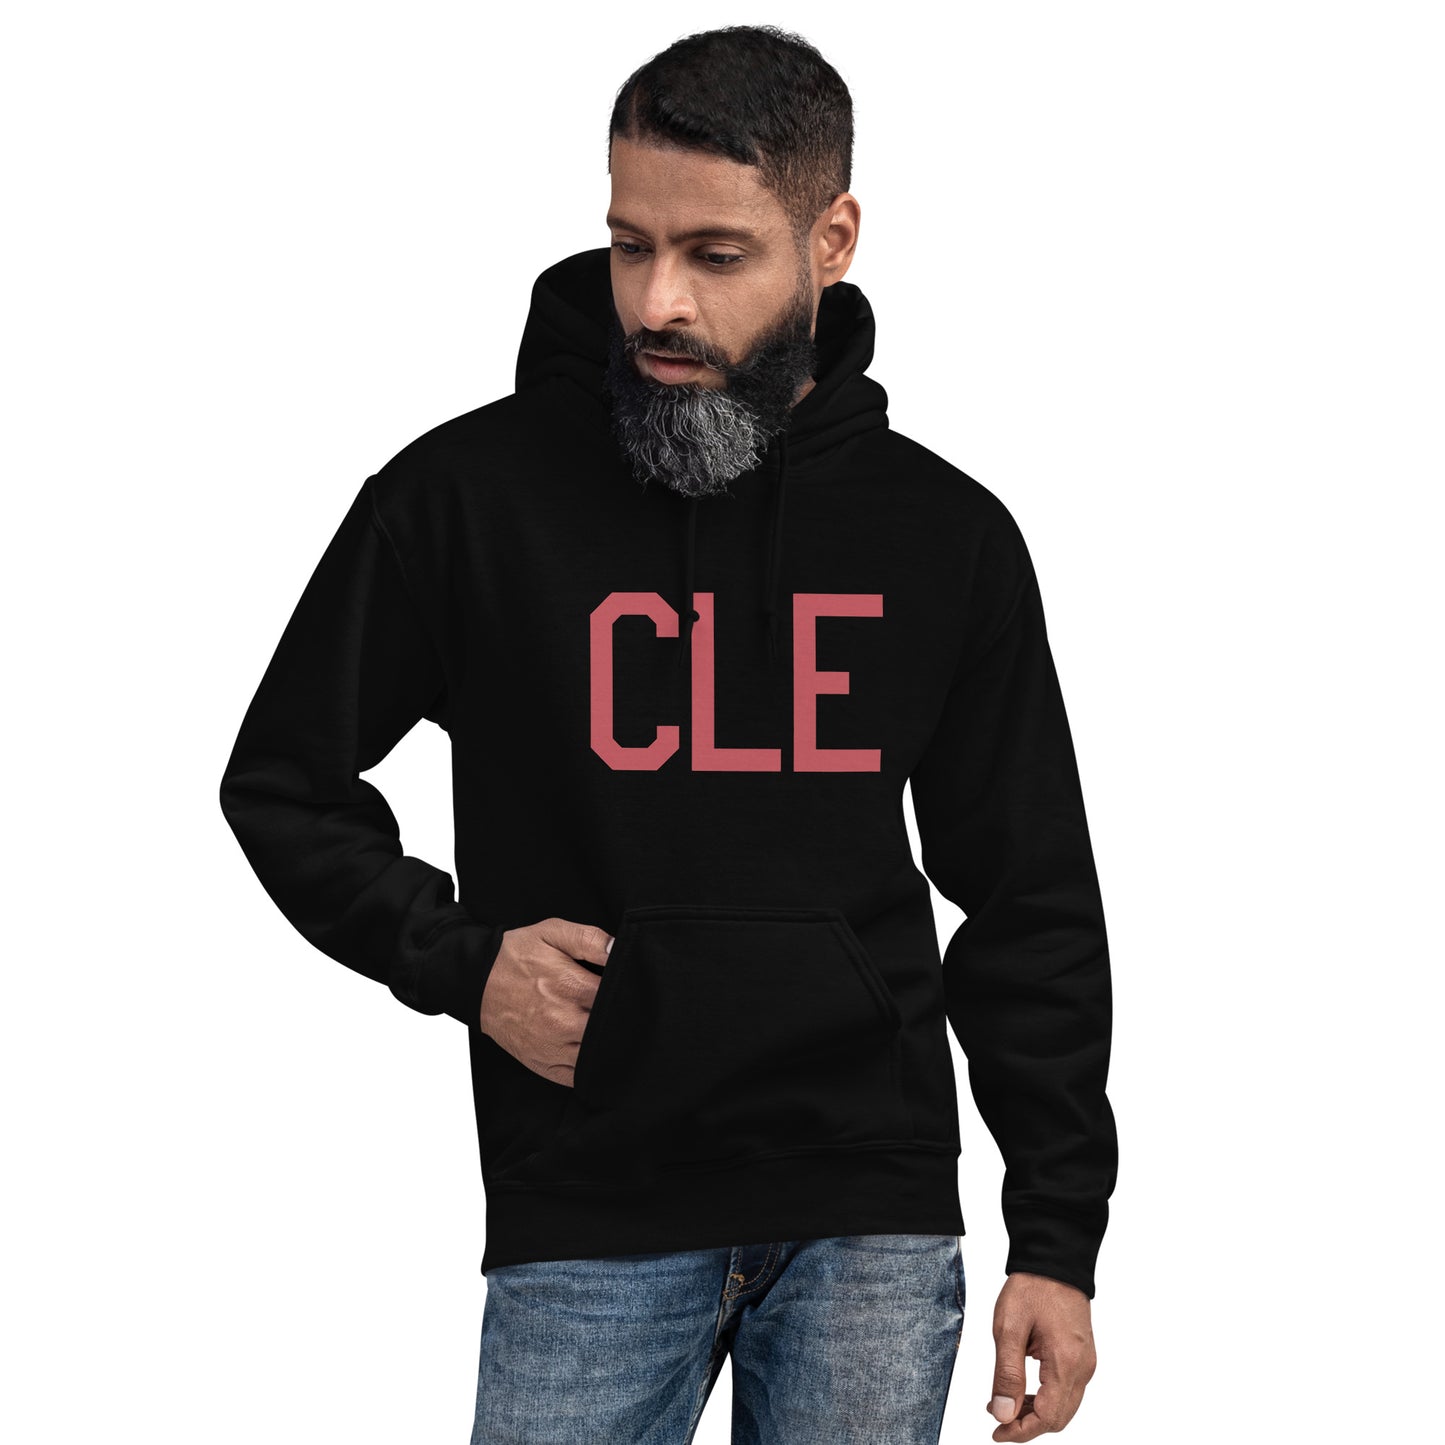 Aviation Enthusiast Hoodie - Deep Pink Graphic • CLE Cleveland • YHM Designs - Image 05